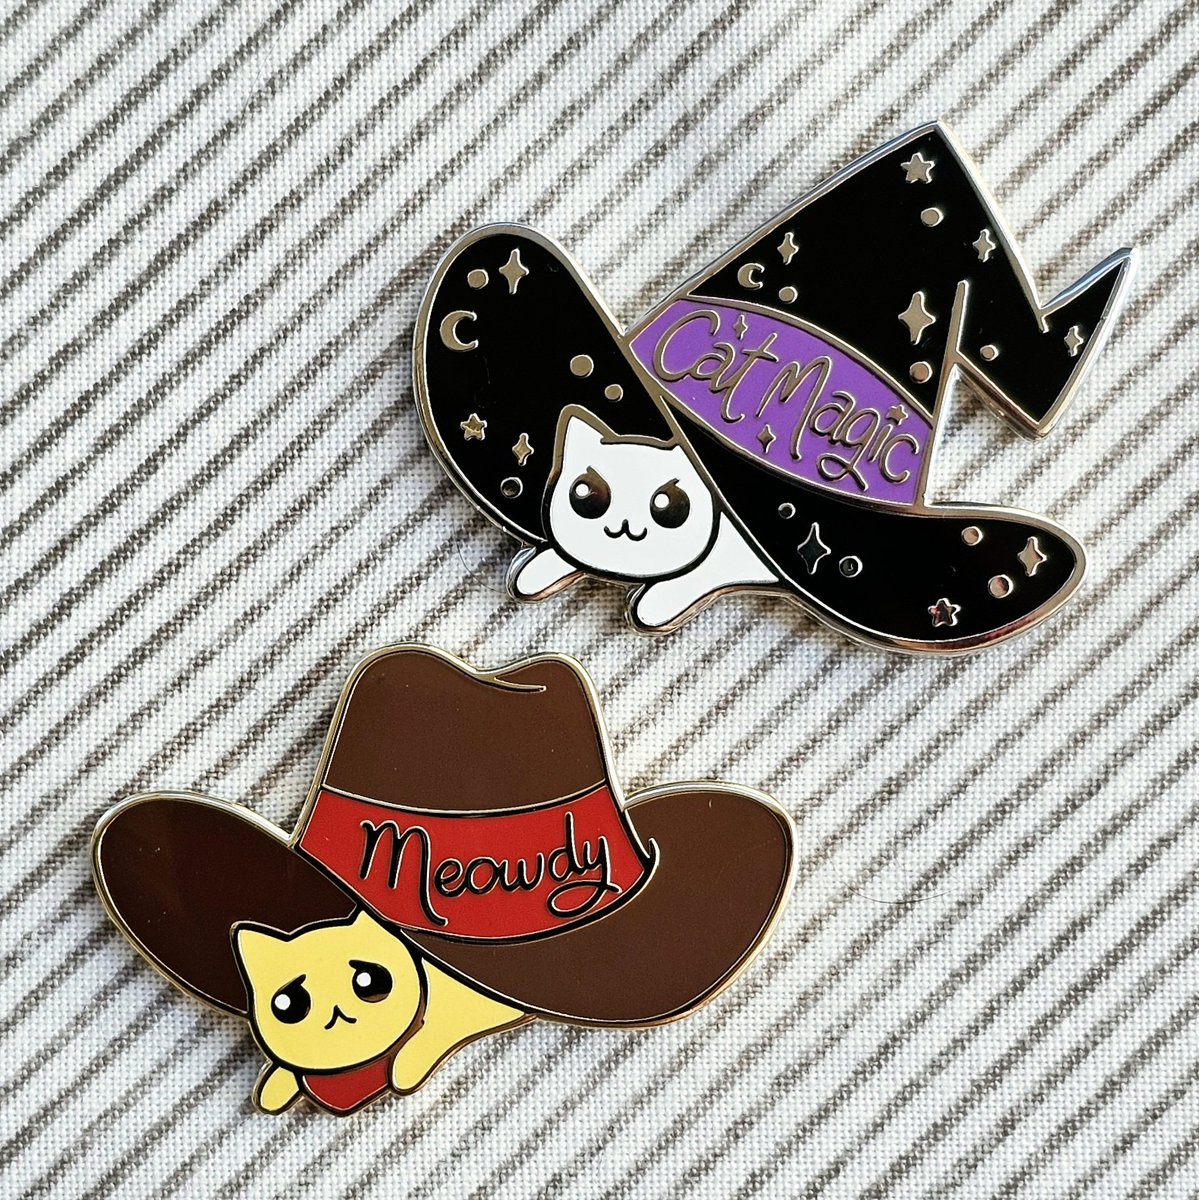 ✨BIG HAT FRIENDS✨ Enamel pins and stickers are all 10% off with the coupon code MEOWMEOW thecathive.com/discount/MEOWM… 🐈🐈‍⬛